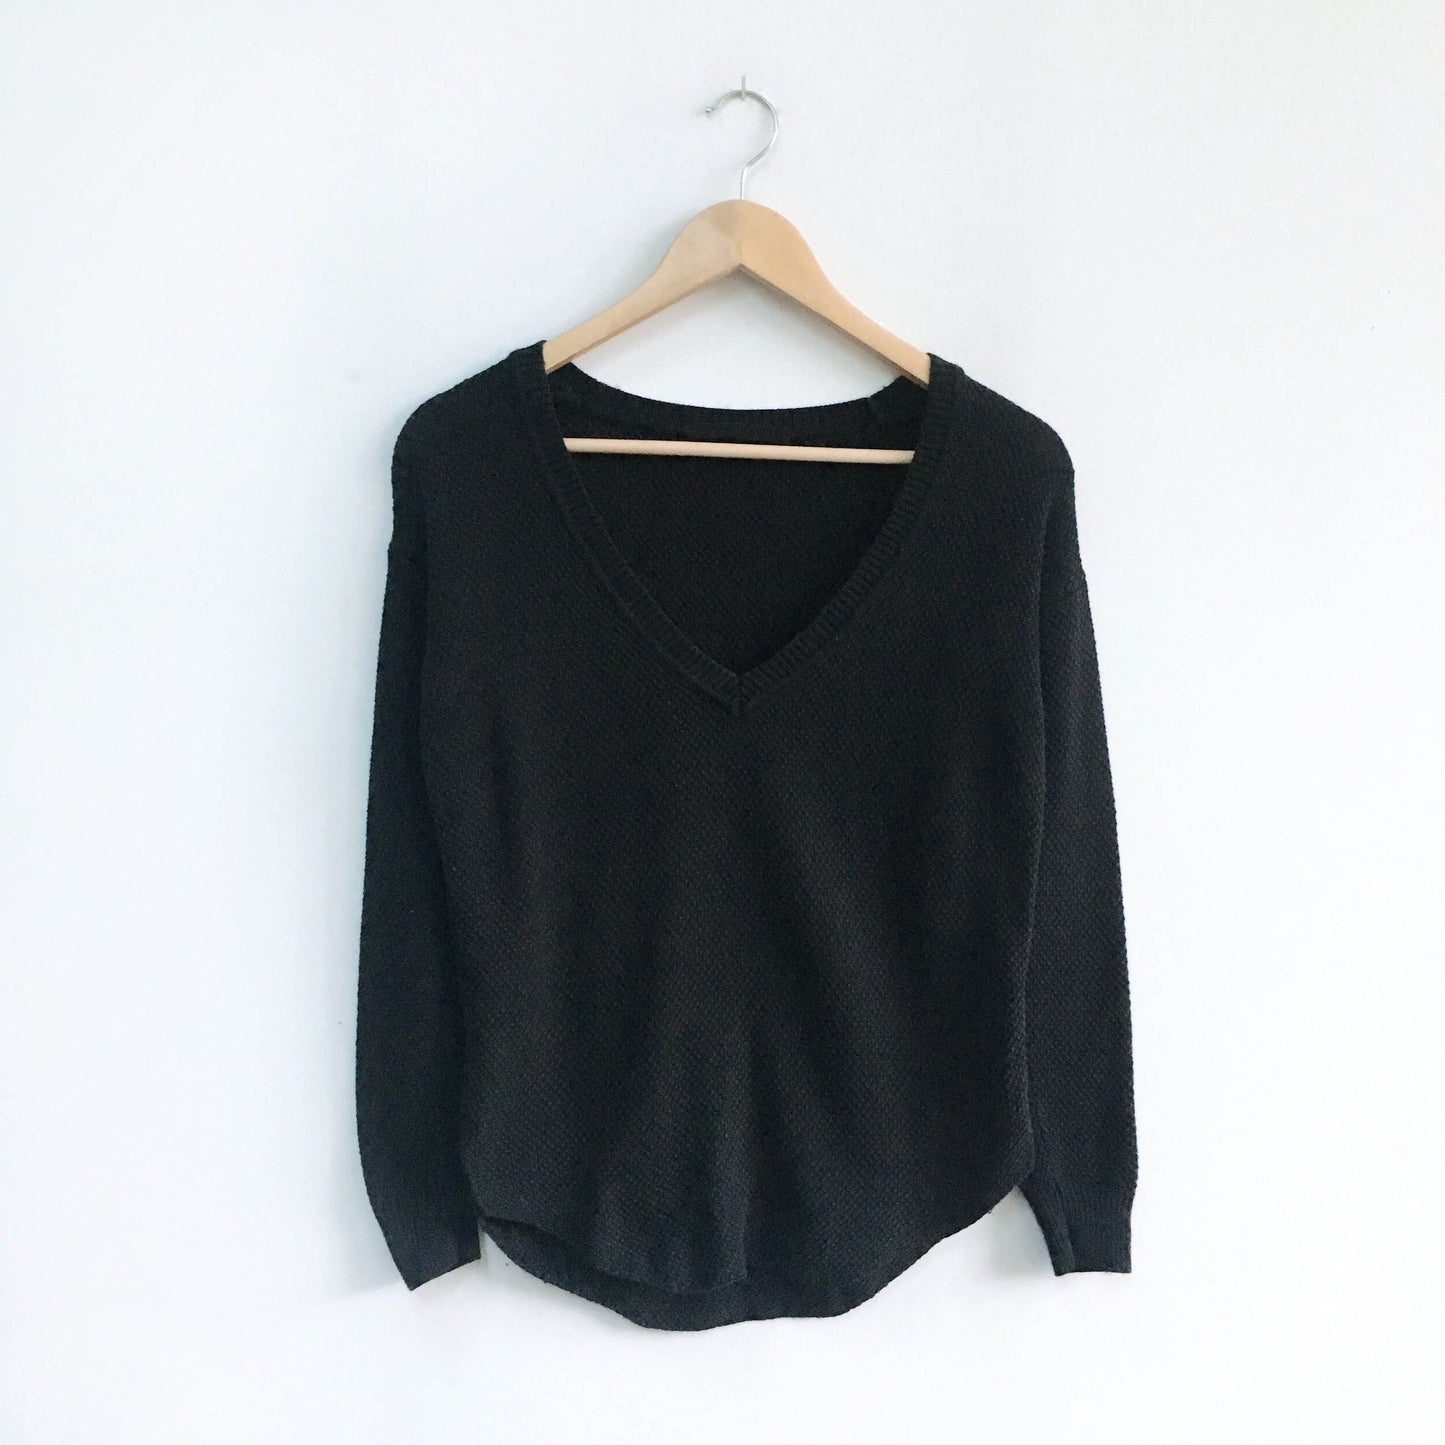 Wilfred Galois Sweater - size xxs